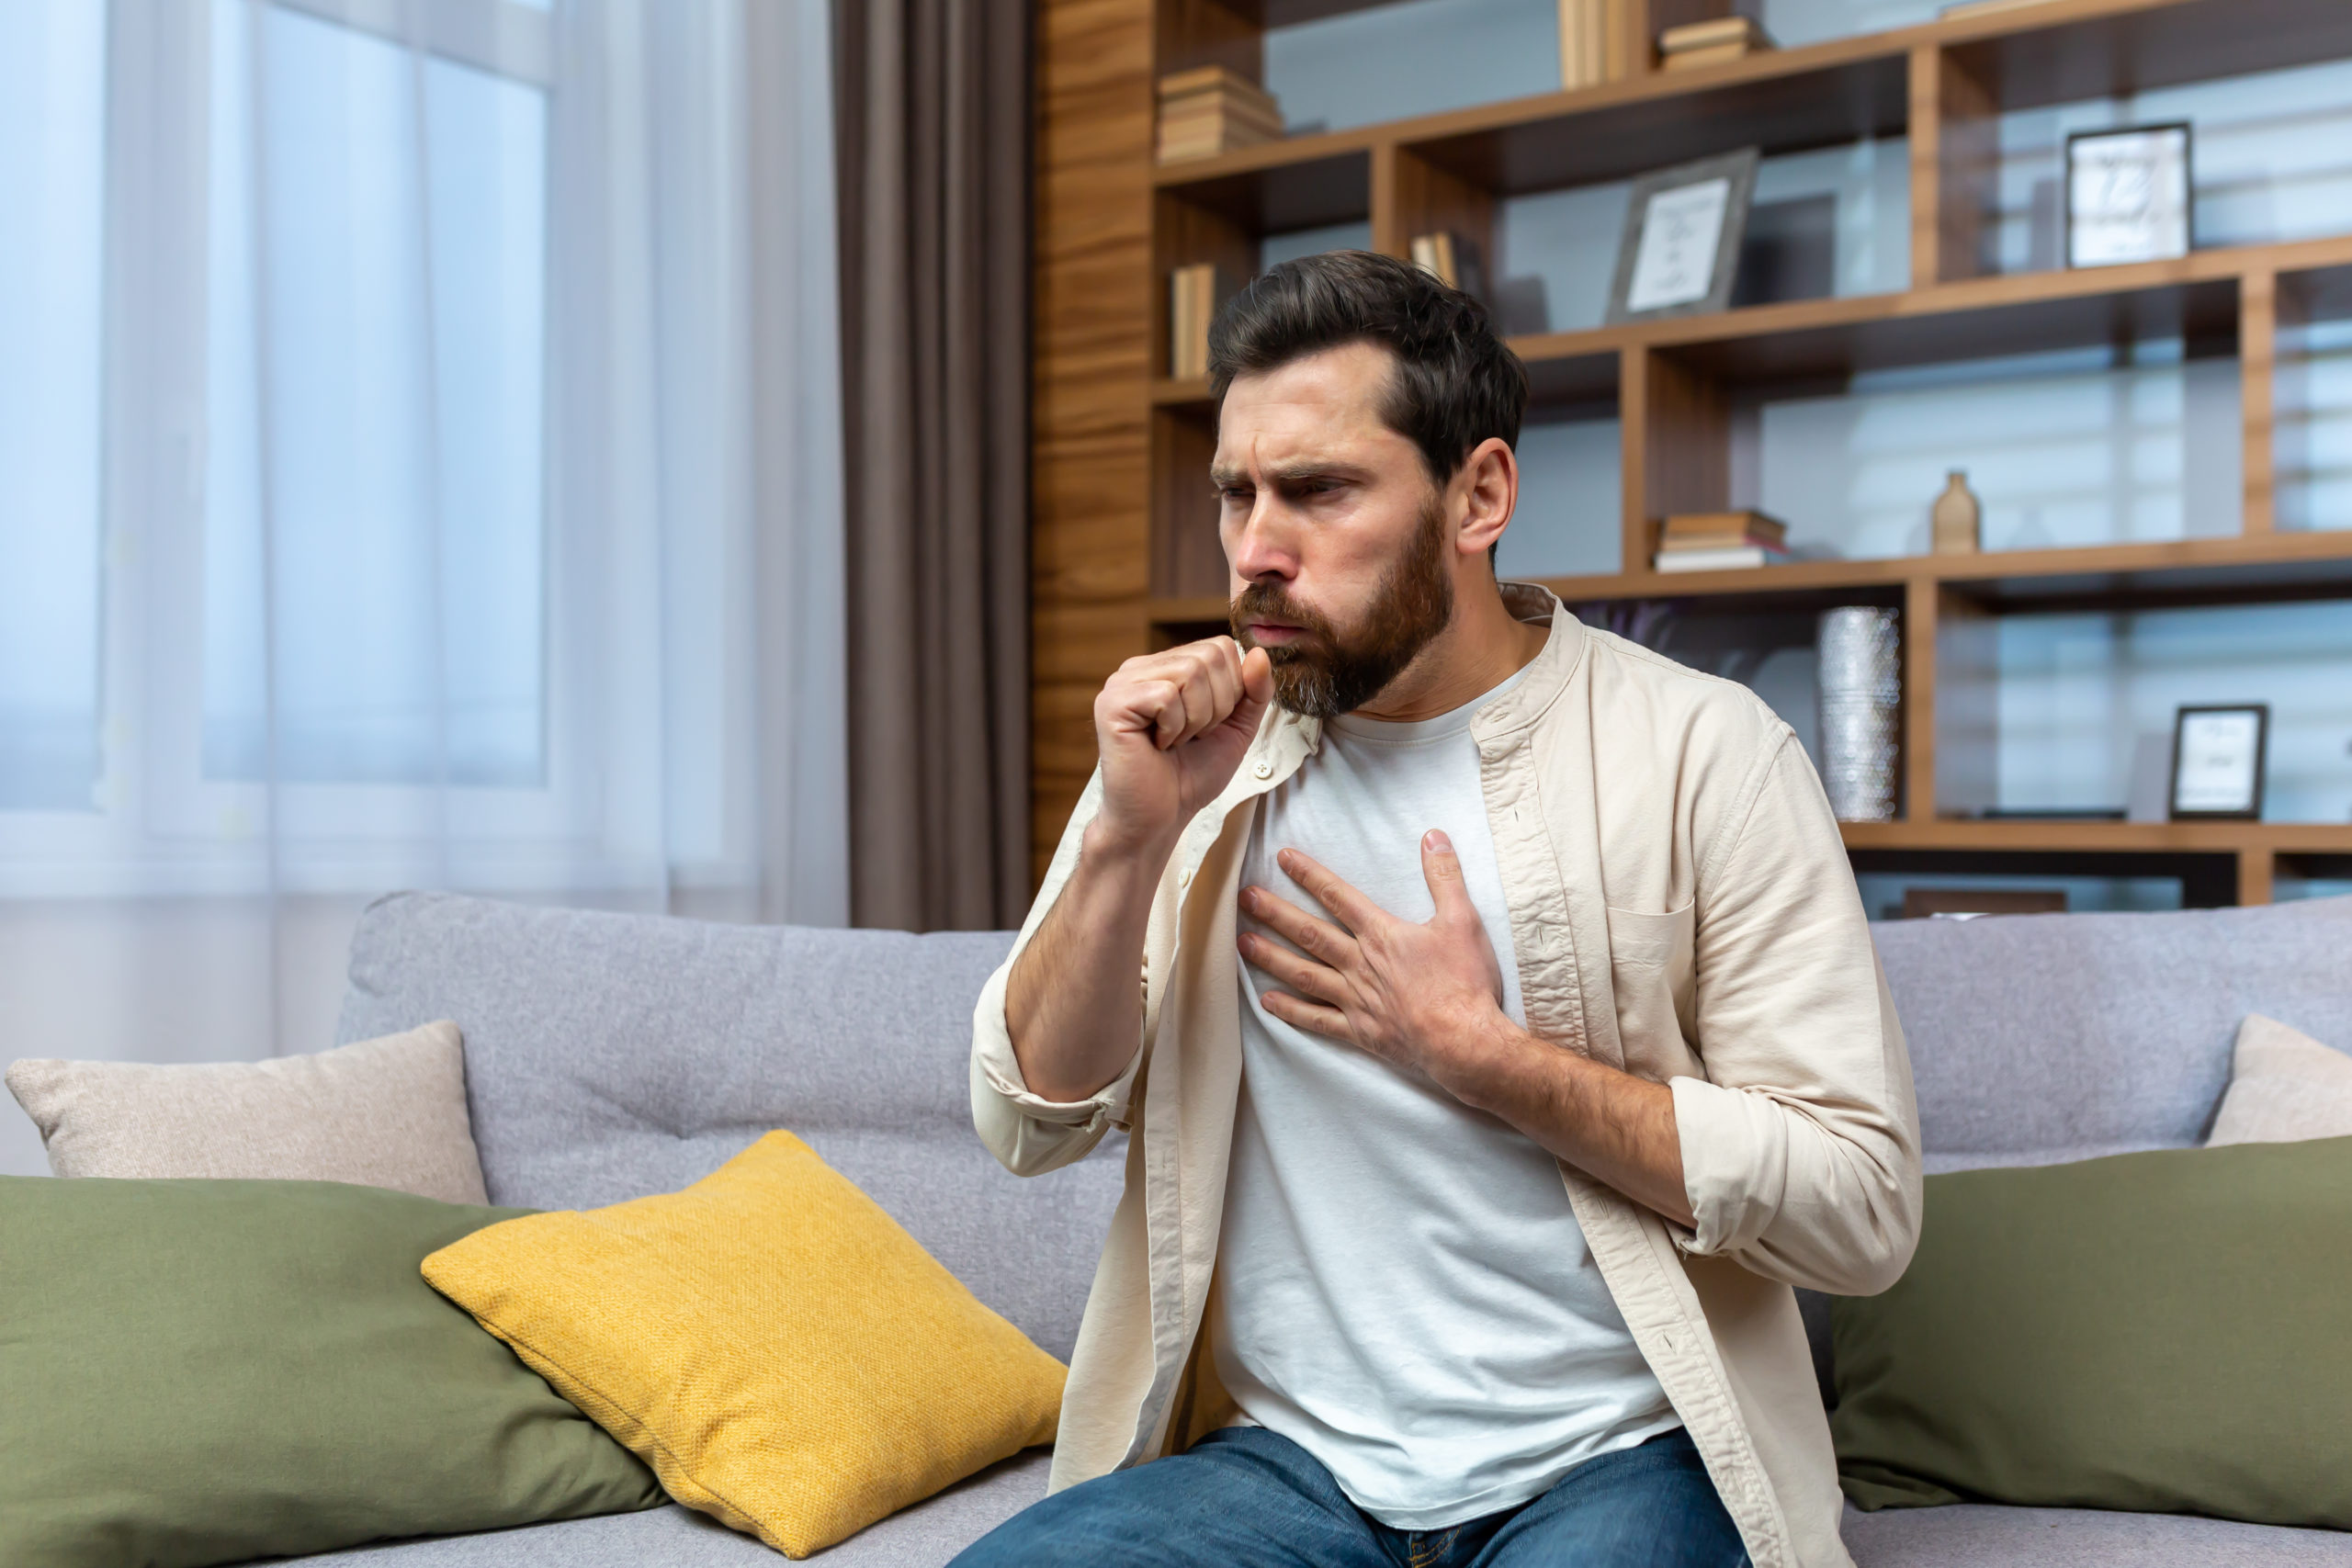 Sick mature man alone at home sitting on sofa coughing holding hands to chest in living room.